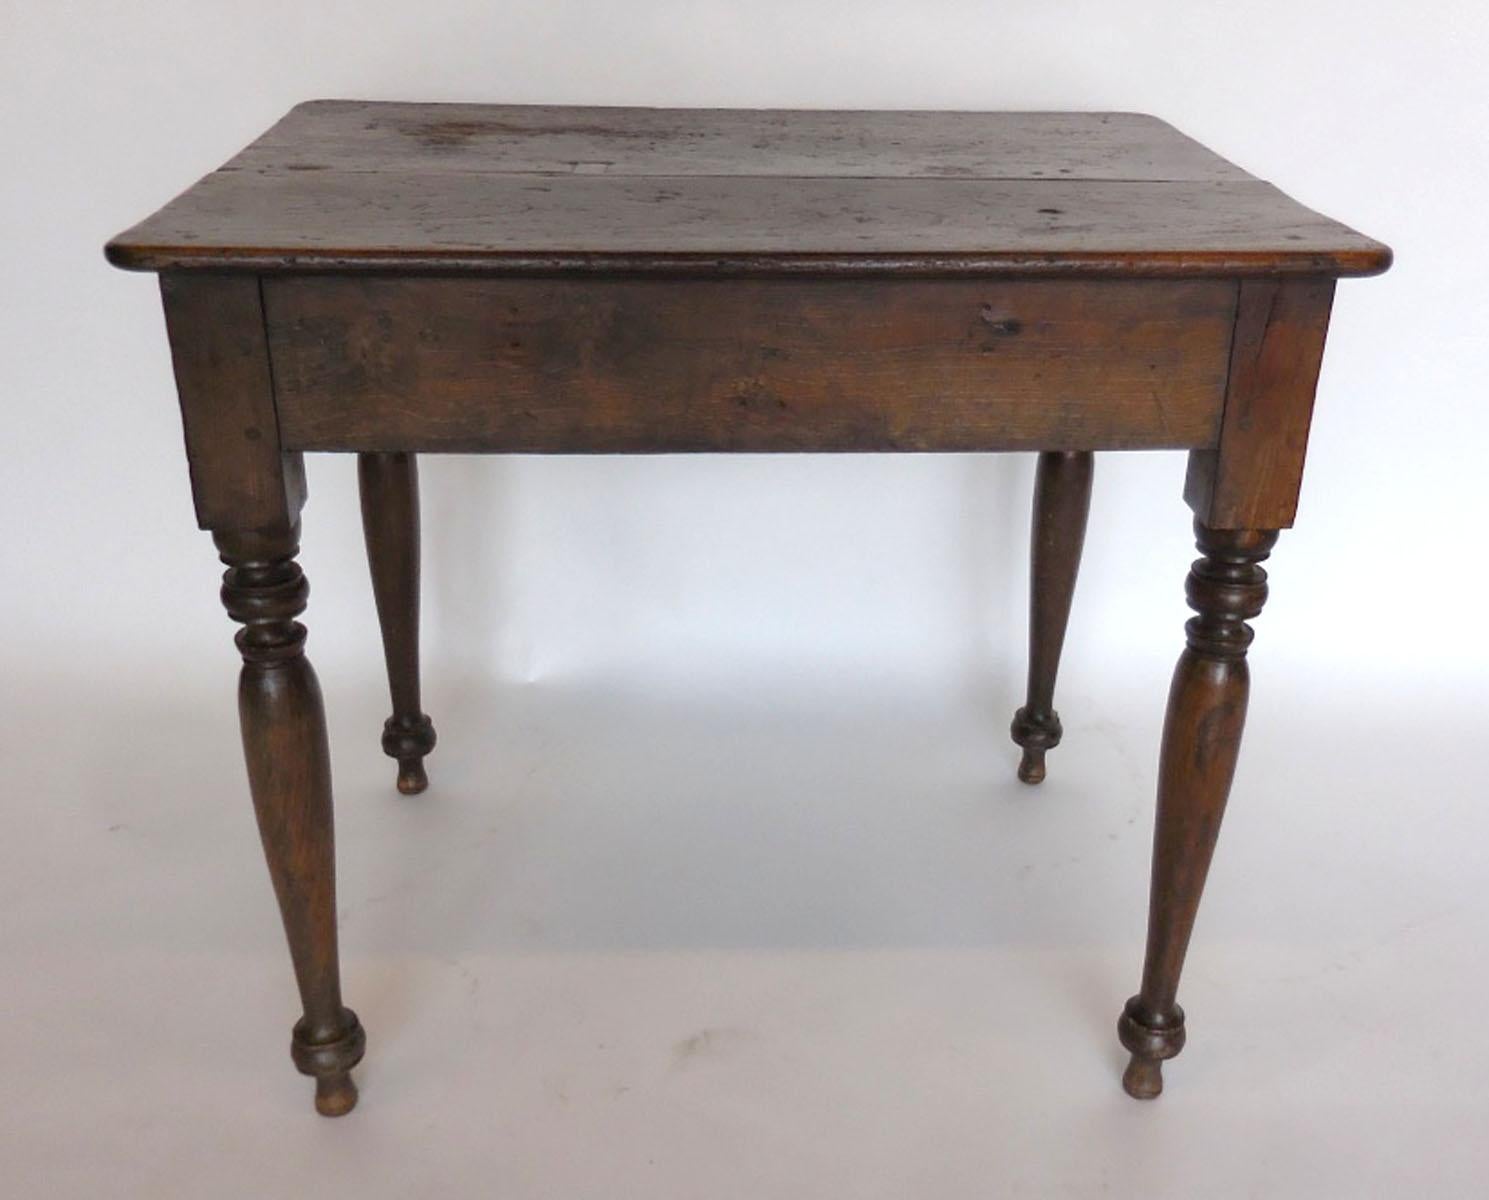 Guatemalan 19th Century Petite Desk or Side Table with Dovetailed Drawer